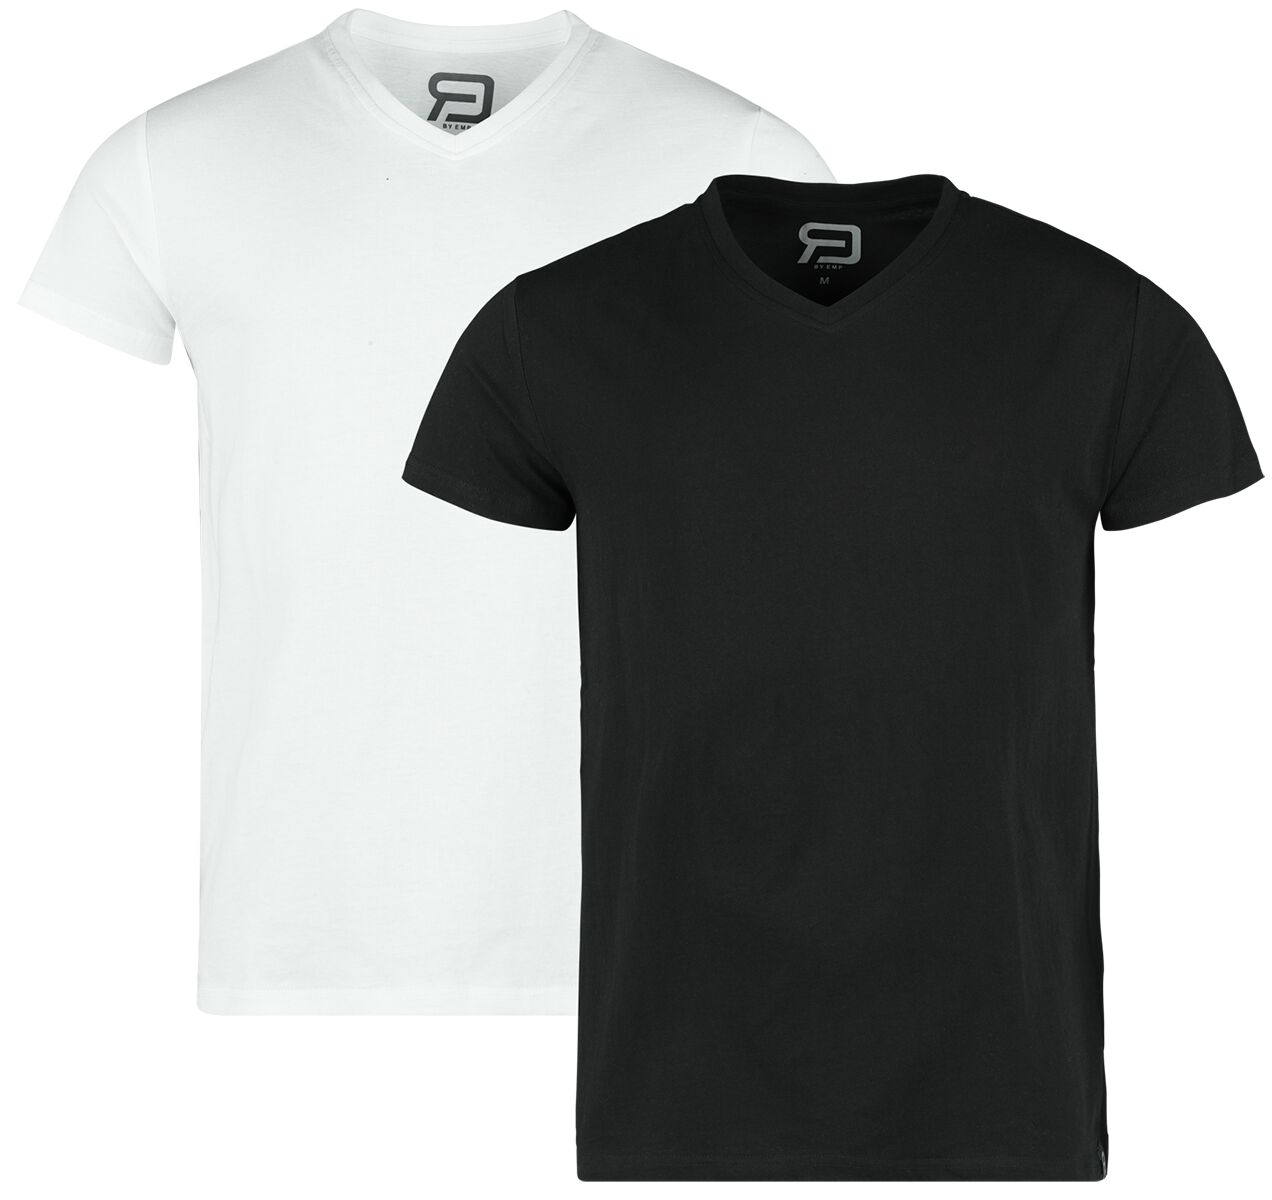 Image of T-Shirt di RED by EMP - Double Pack T-Shirts - S a XXL - Uomo - nero/bianco